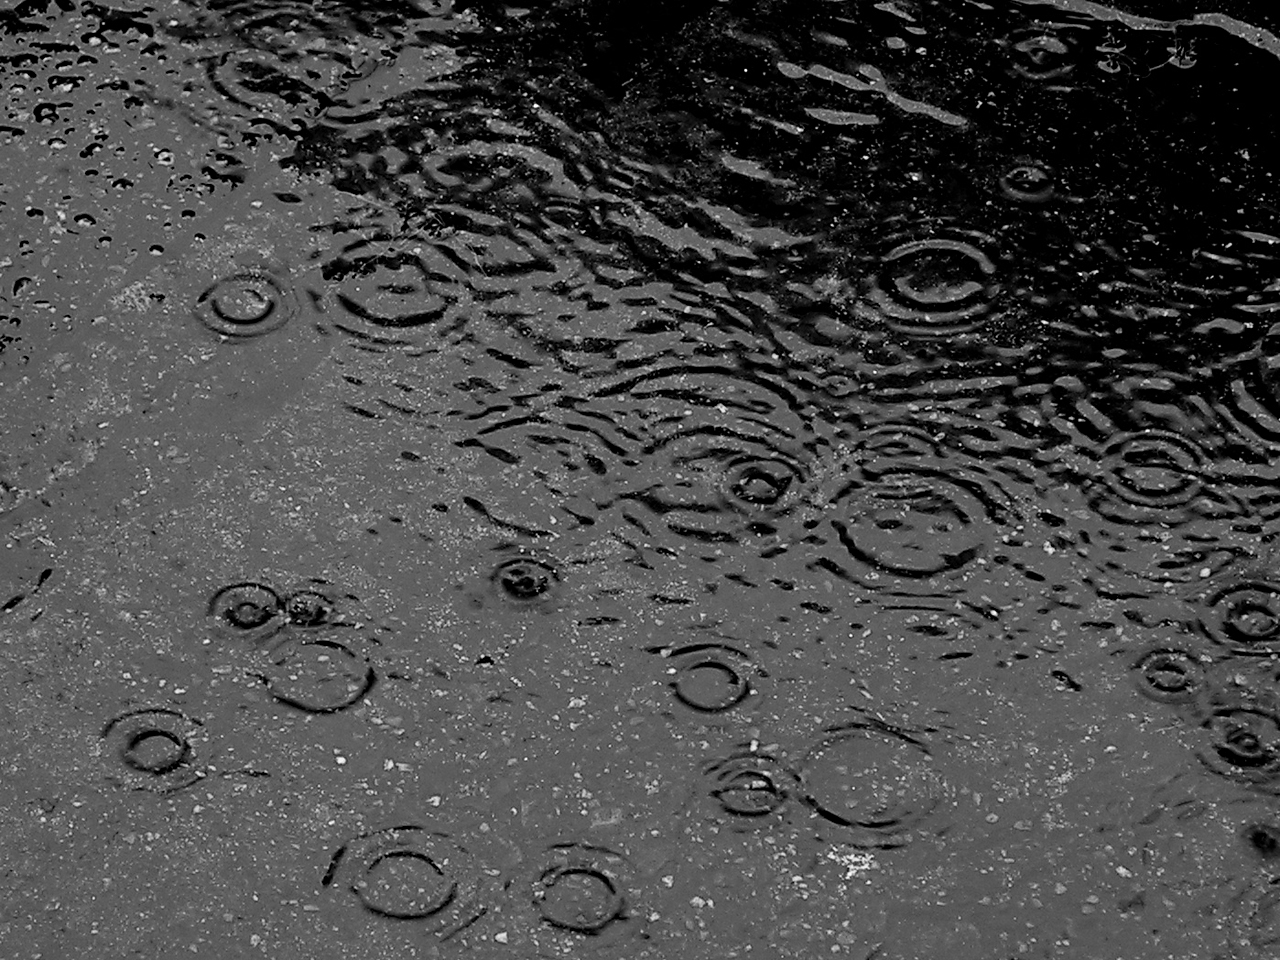 Raindrops falling on water